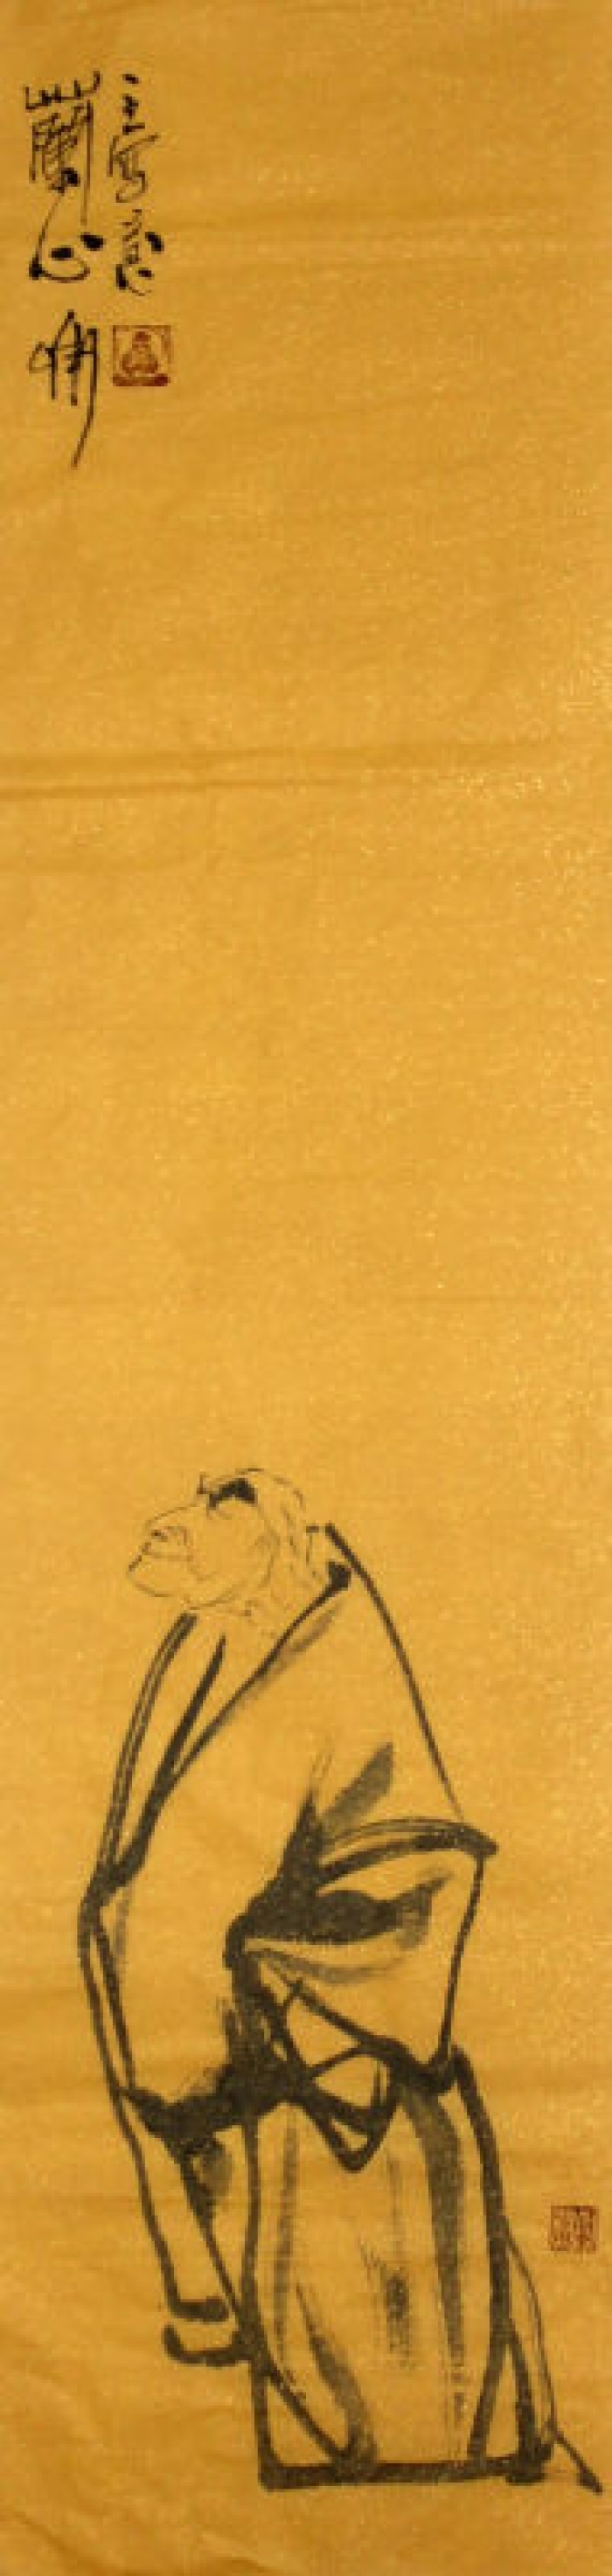 Lin Xinghu's Contemporary Chinese Painting - Untitled Series